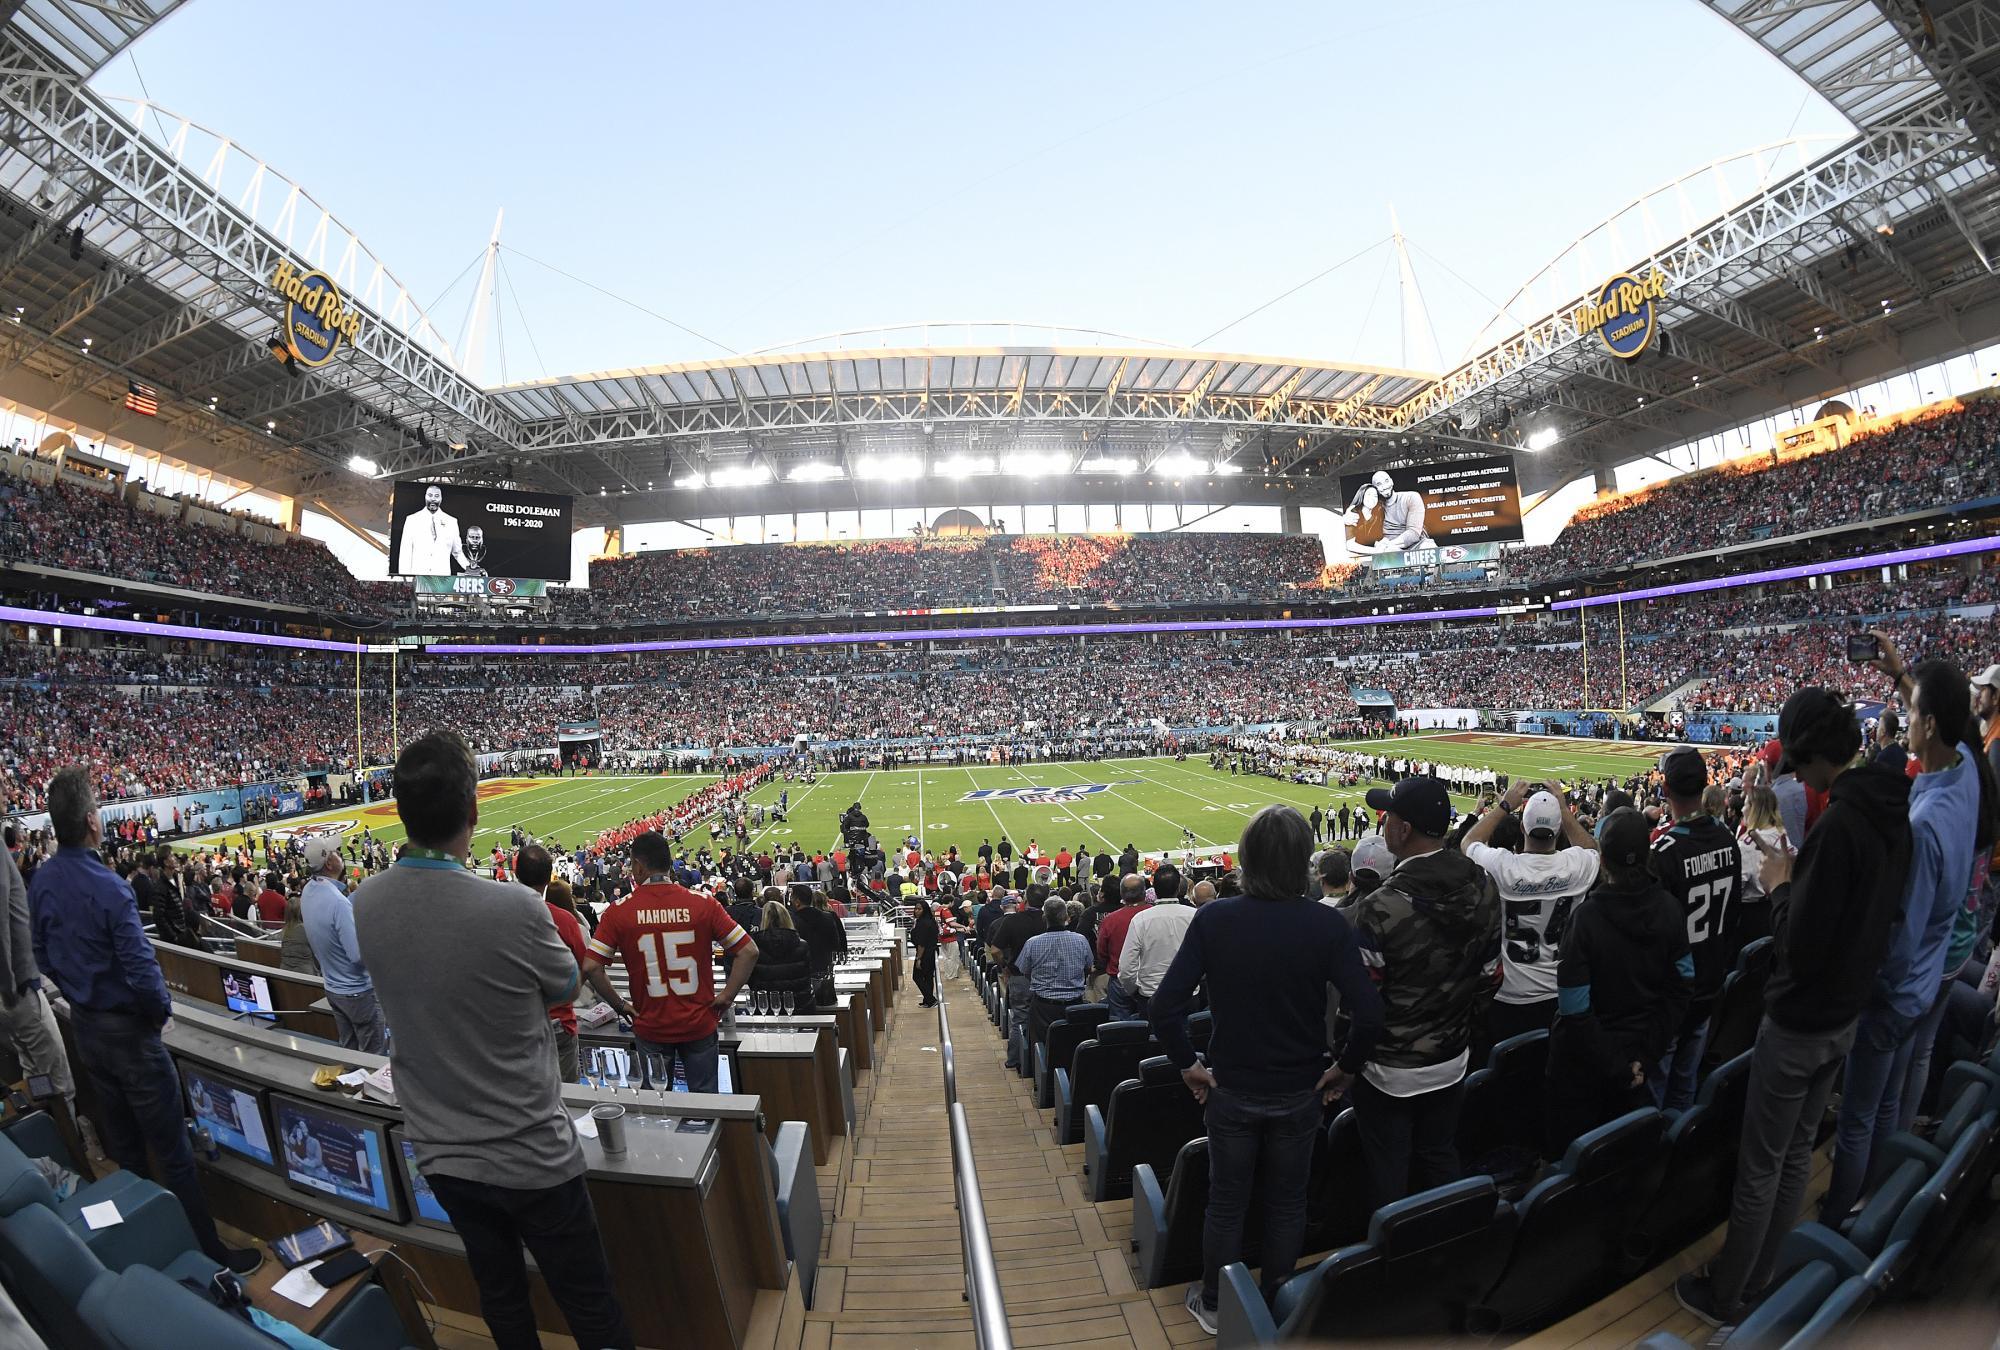 MIAMI, FLORIDA - FEBRUARY 02: A detailed overview with San Francisco 49ers and Kansas City Chiefs standing on the field prior to the start of Super Bowl LIV against the Kansas City Chiefs at Hard Rock Stadium on February 02, 2020 in Miami, Florida. The Ch